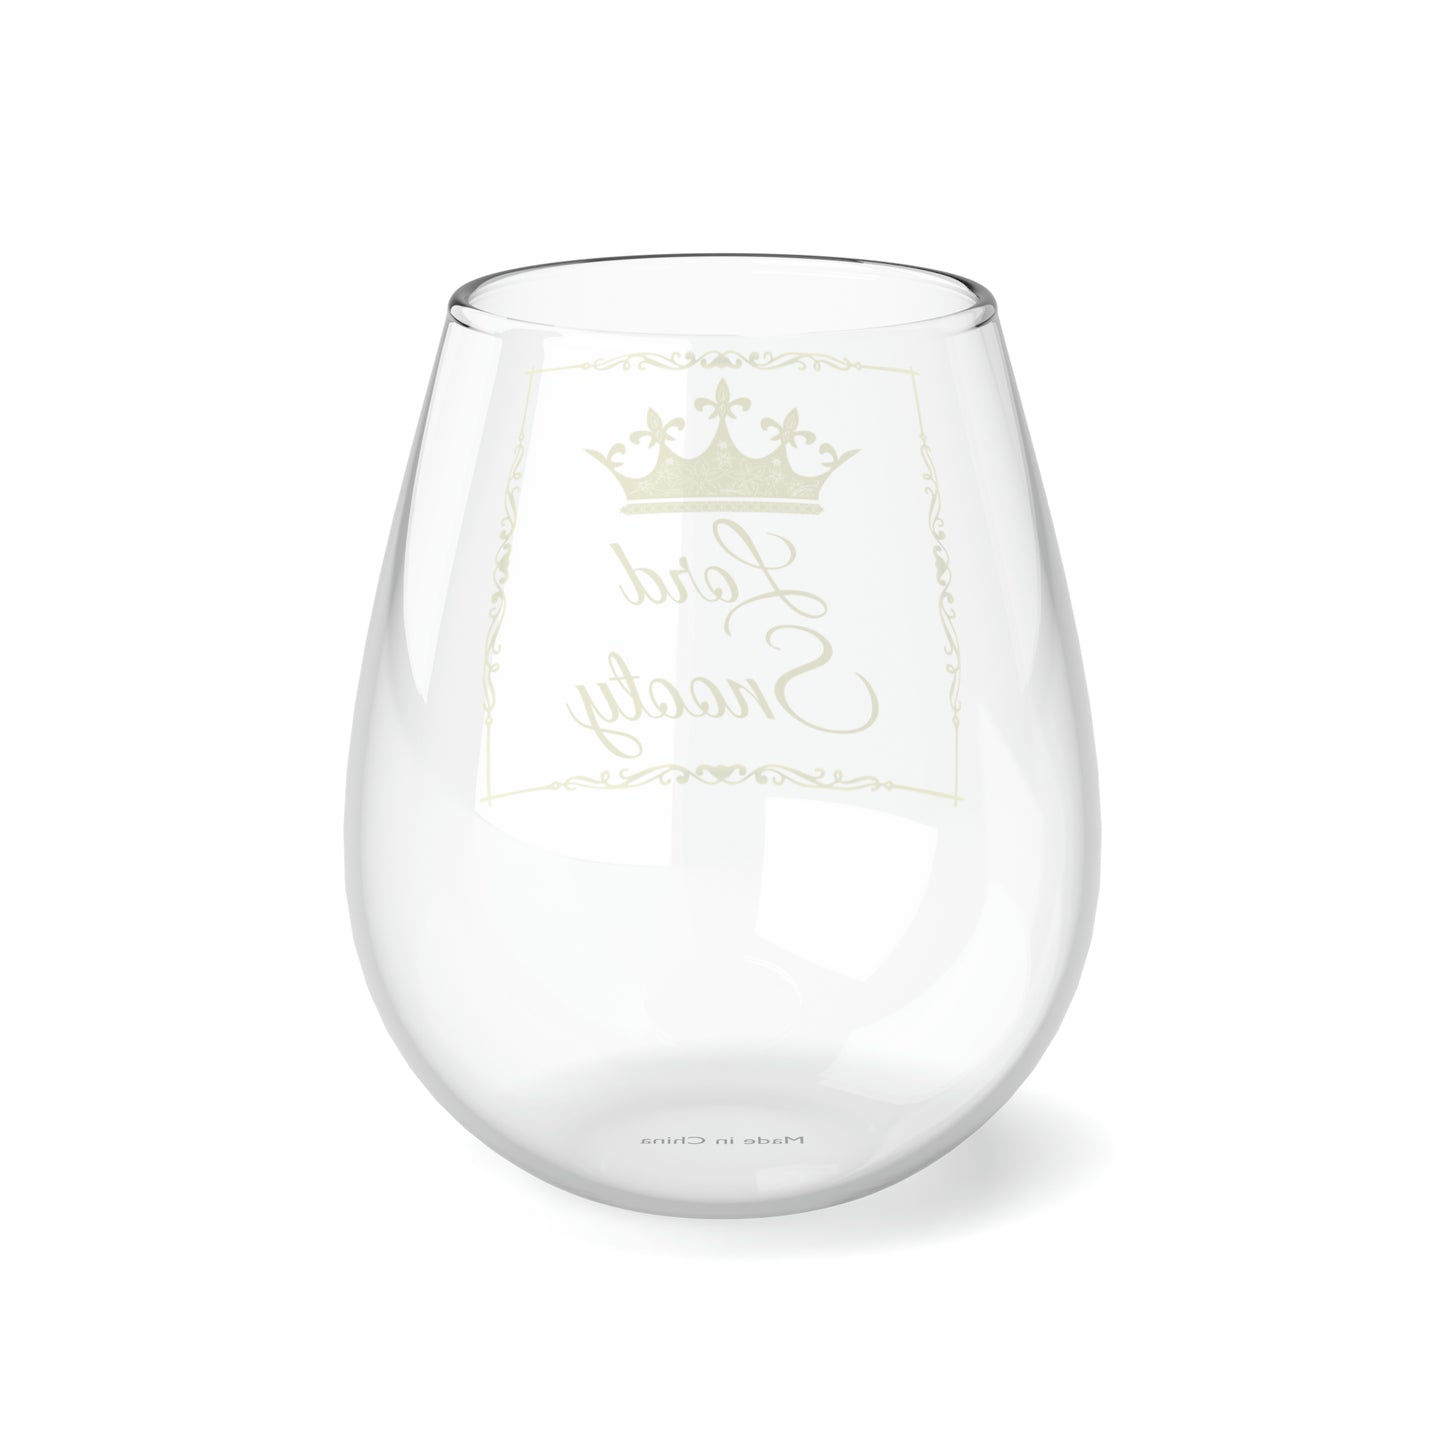 Lord Snooty Stemless Wine Glass, 11.75oz